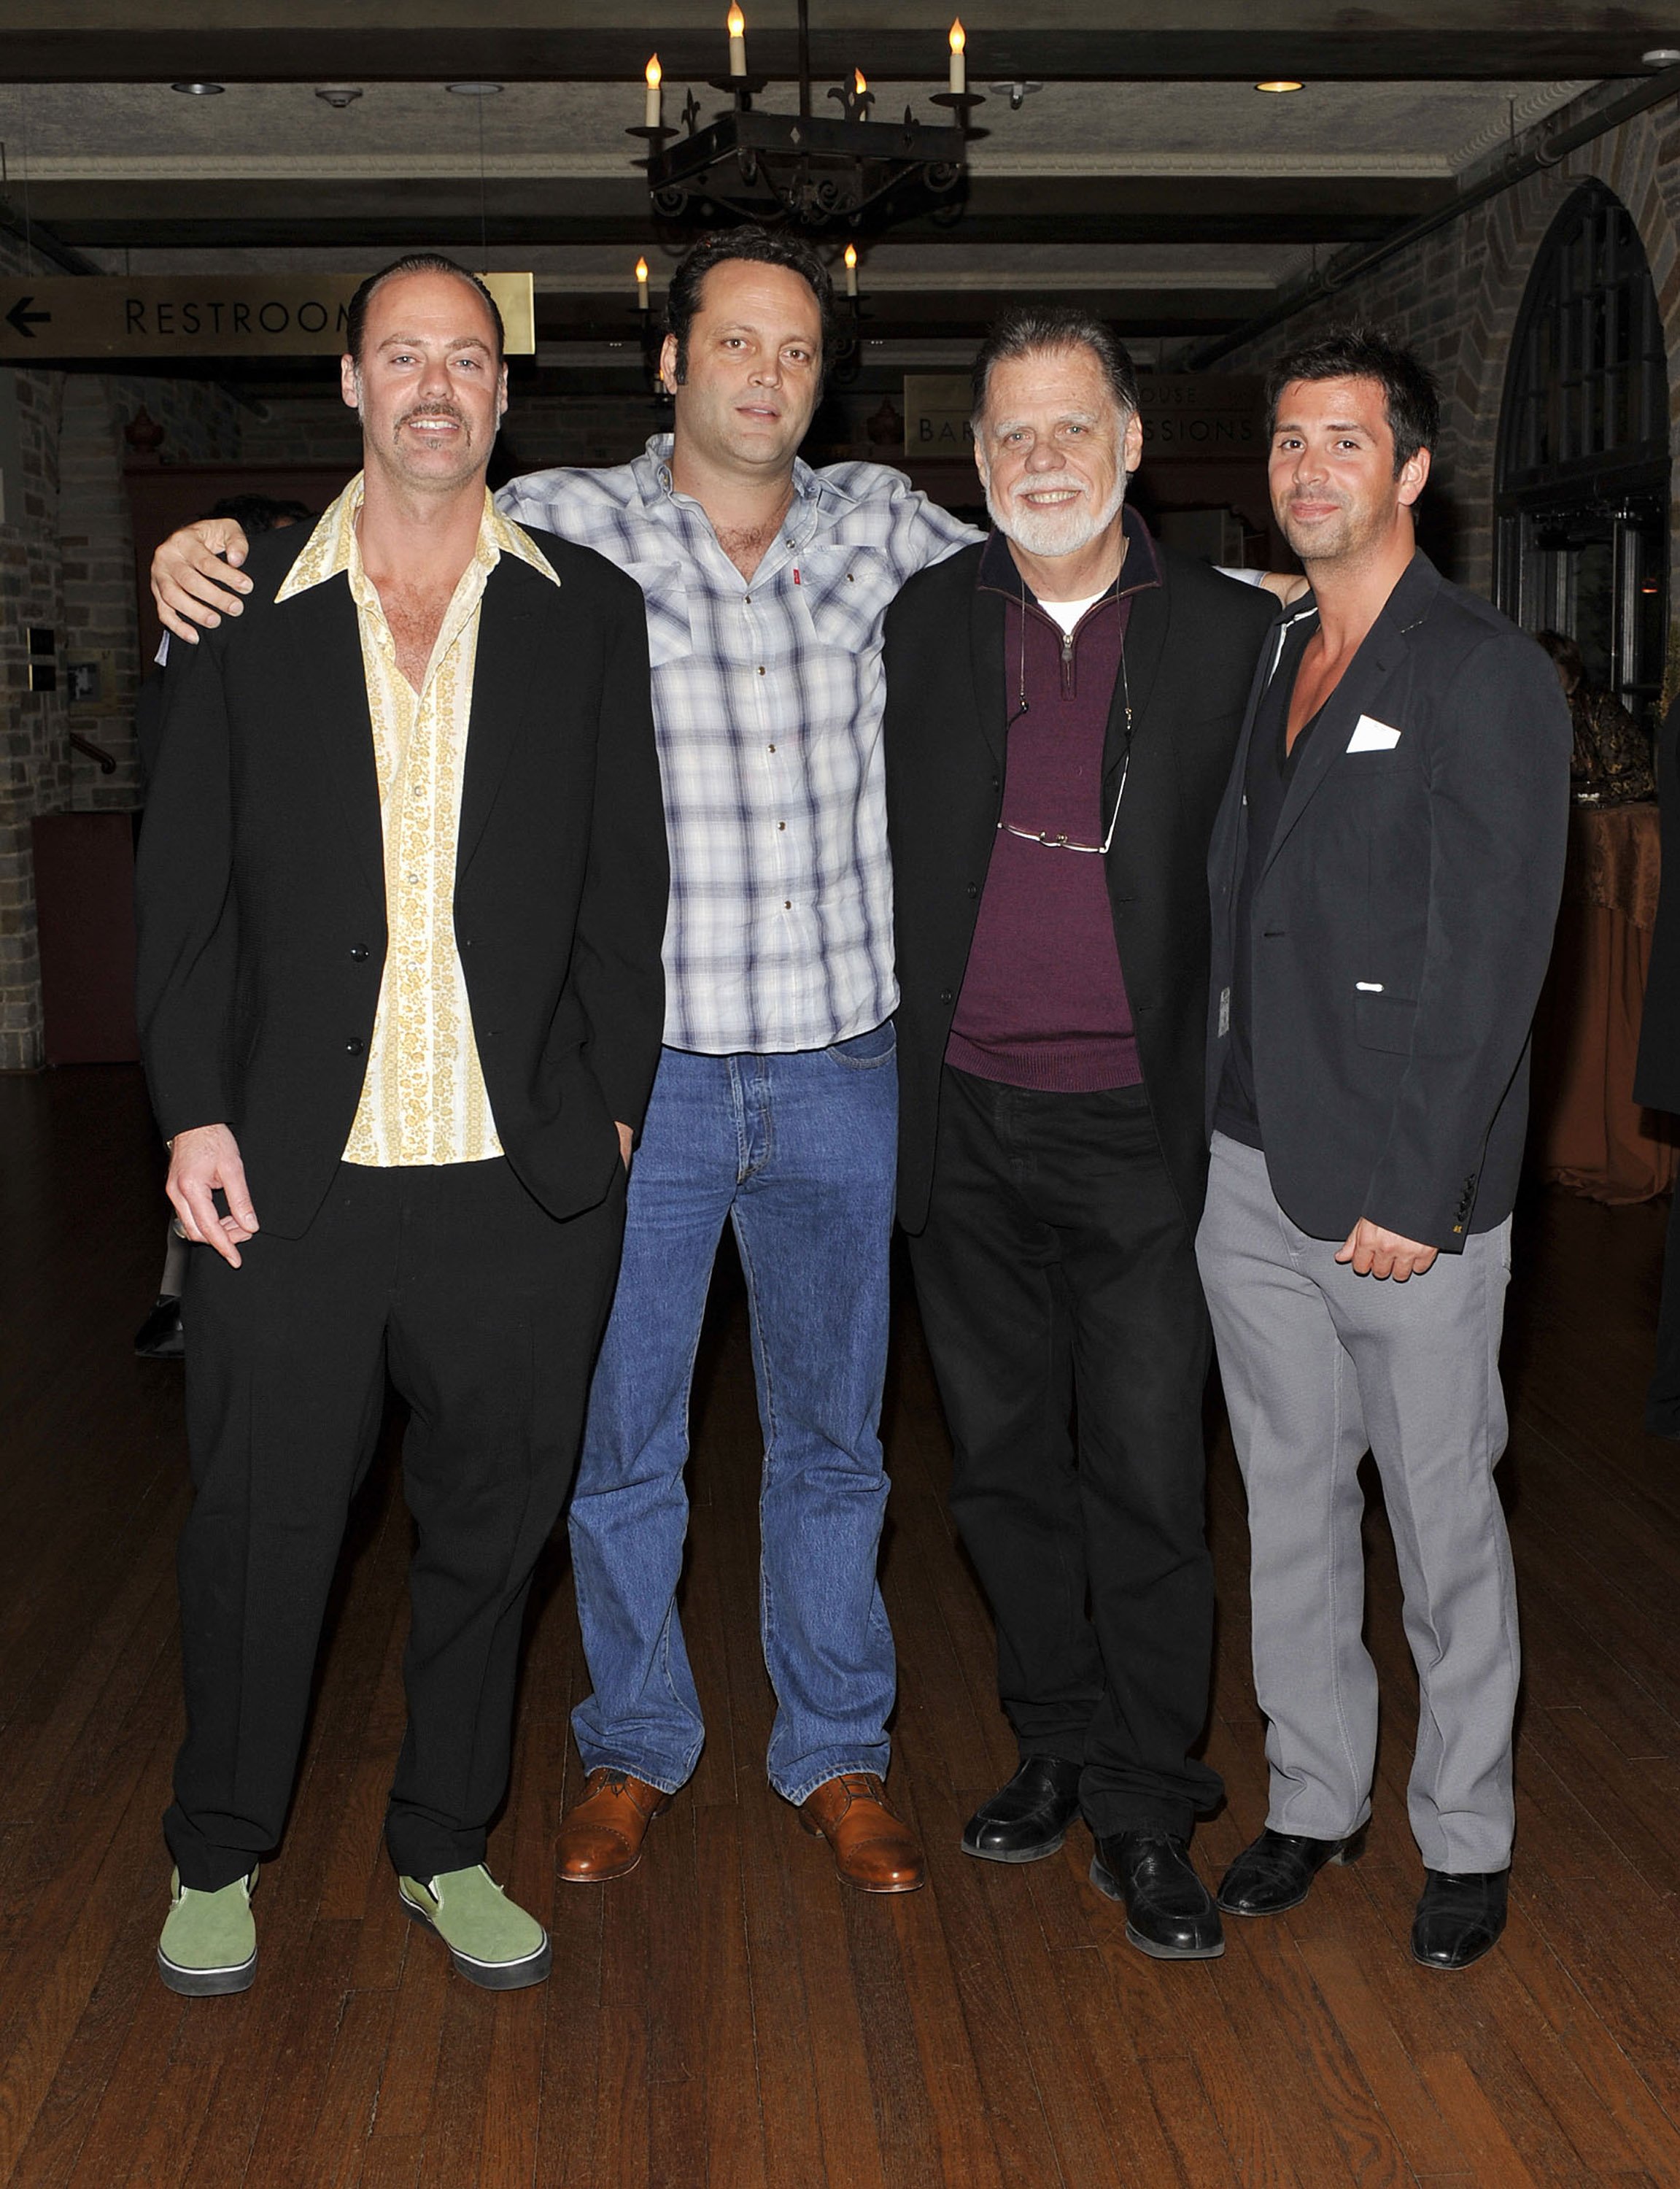 Rio Hackford, Vince Vaughn, Taylor Hackford, and Alex Hackford at the opening night of "Louis & Keely" on March 19, 2009, in Los Angeles, California. | Source: Getty Images